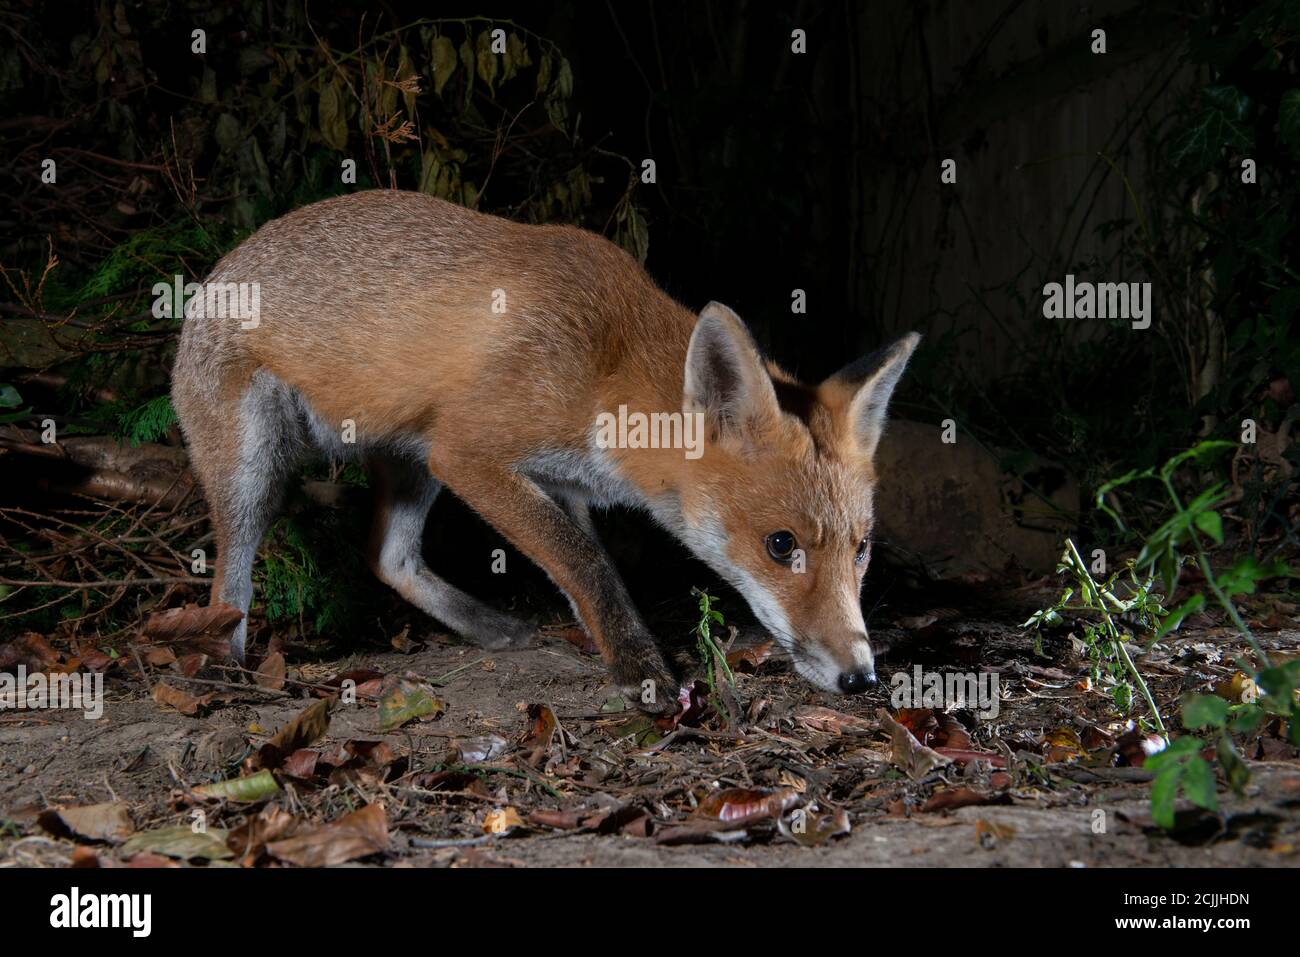 Fox at night searching for food with catchlight in eye Stock Photo